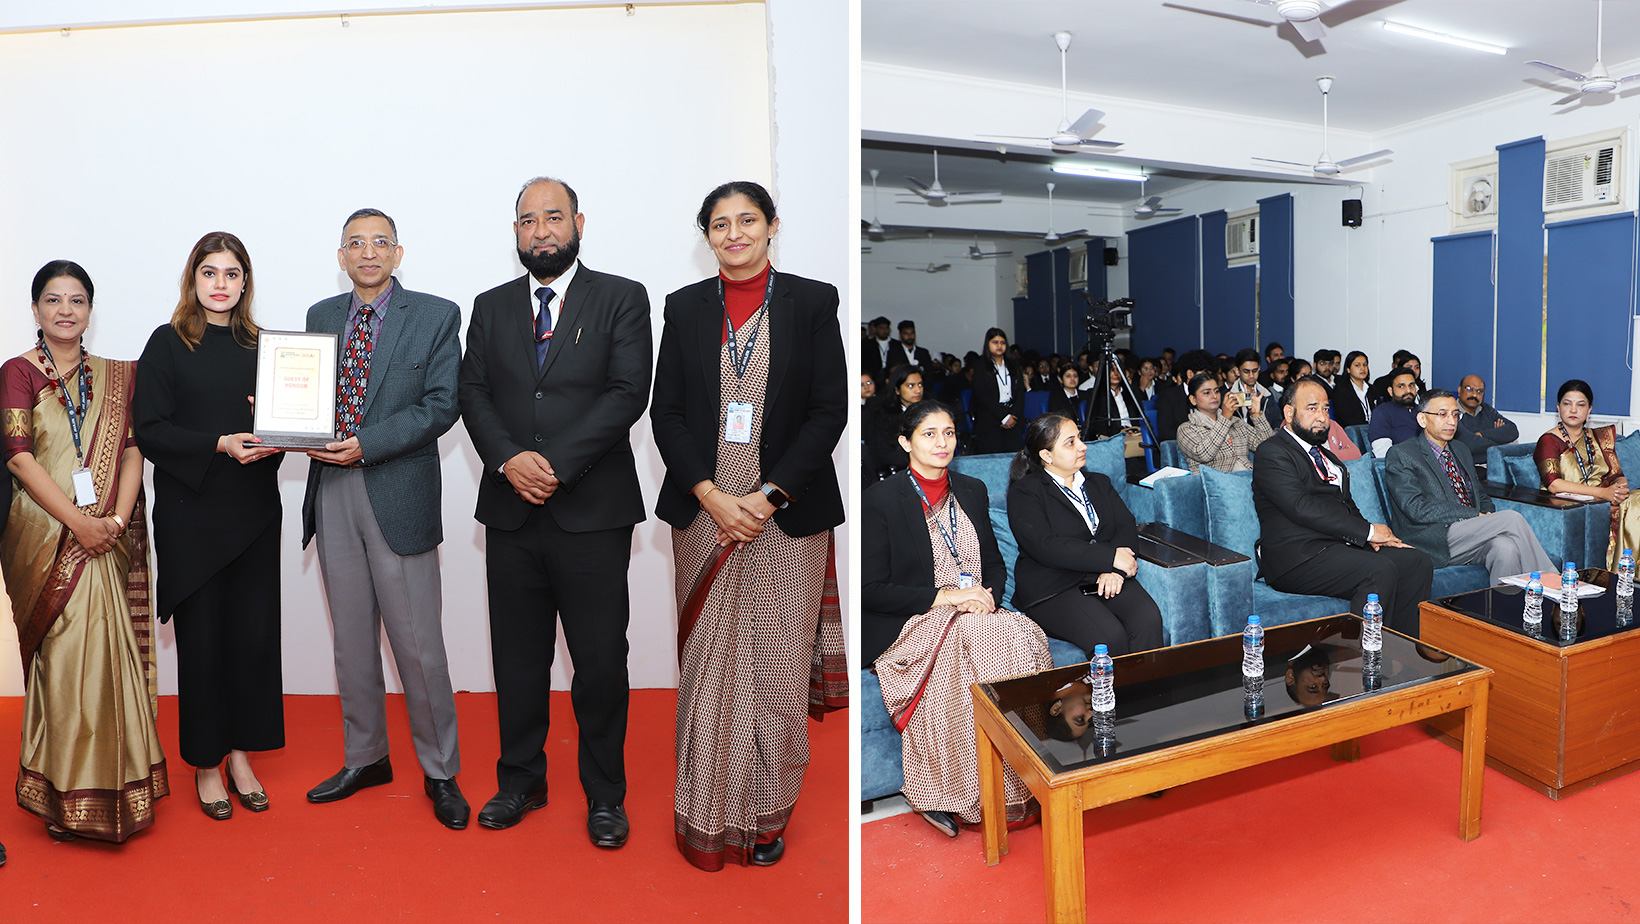 Chandigarh Law College Jhanjeri recently hosted an insightful session on 